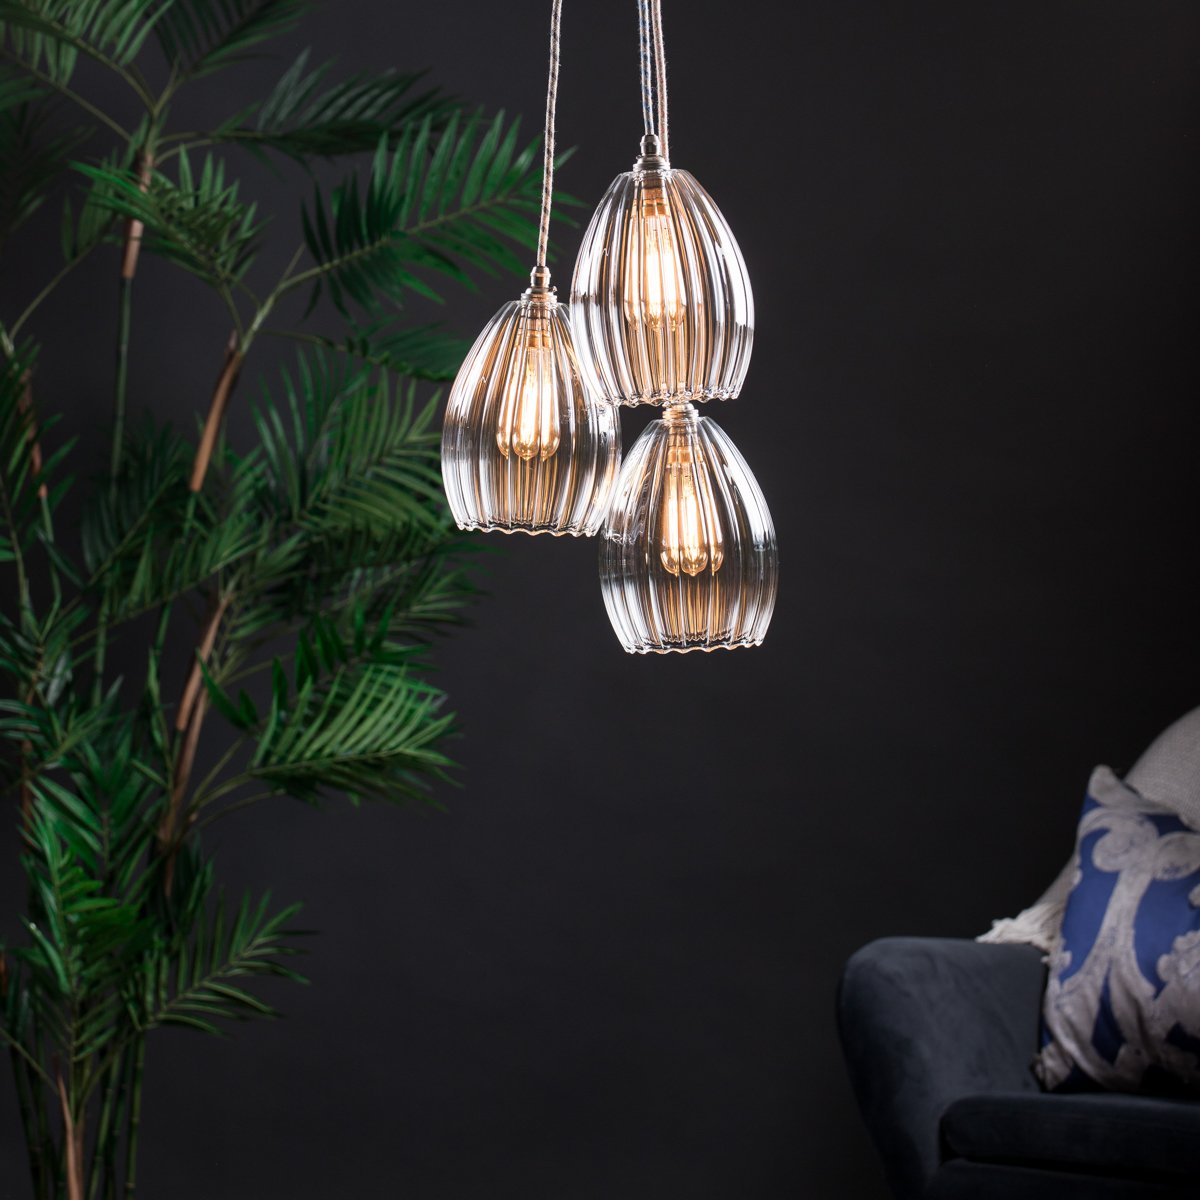 Image of Molly mid 3 way cluster glass pendant light